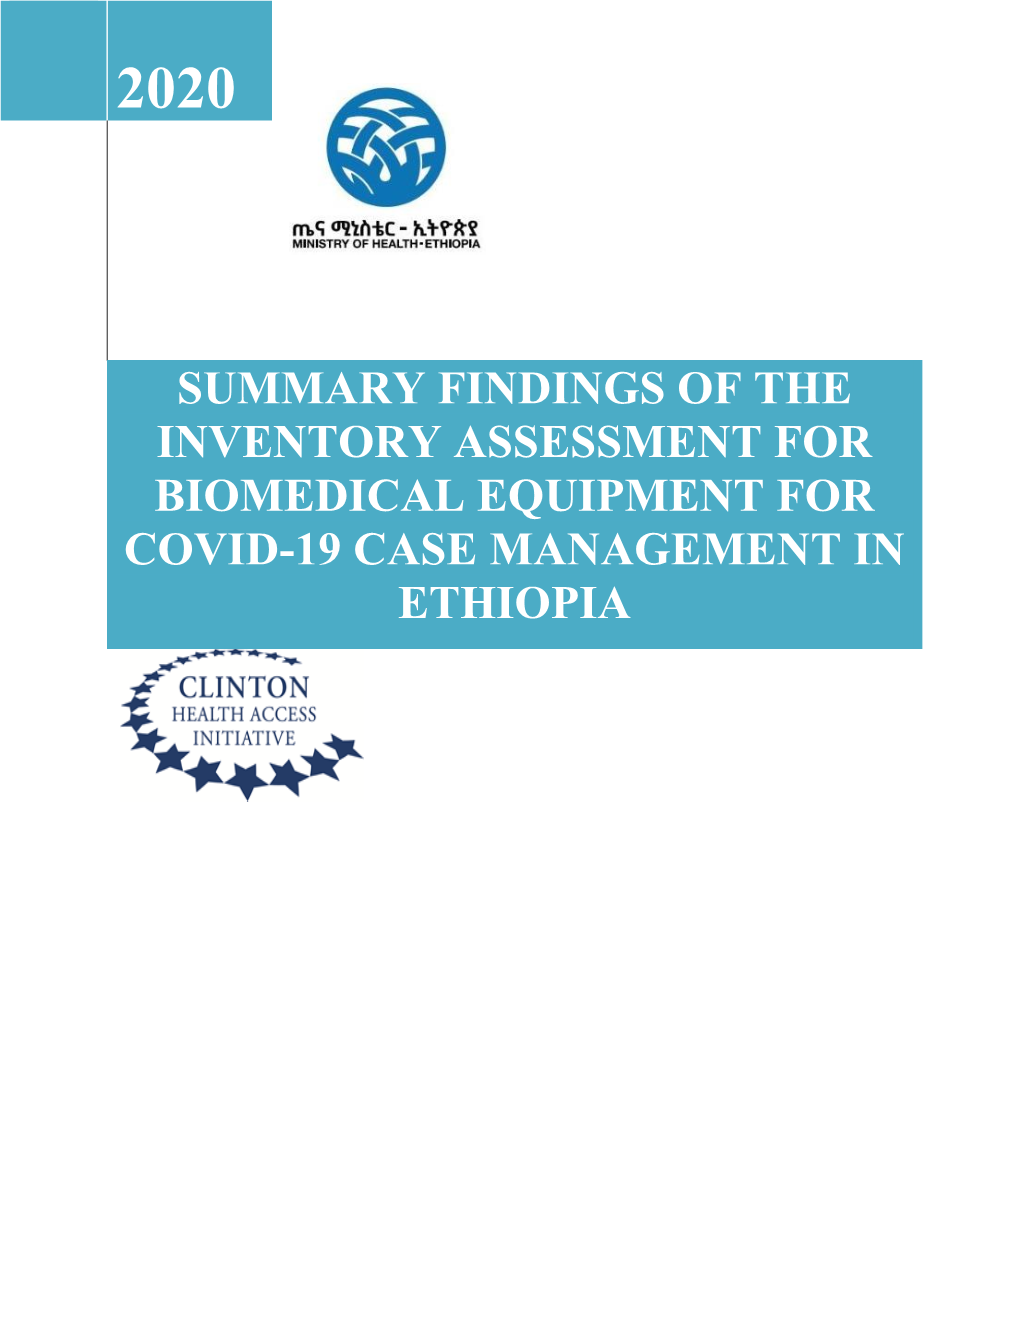 Summary Findings of the Inventory Assessment for Biomedical Equipment for Covid-19 Case Management in Ethiopia